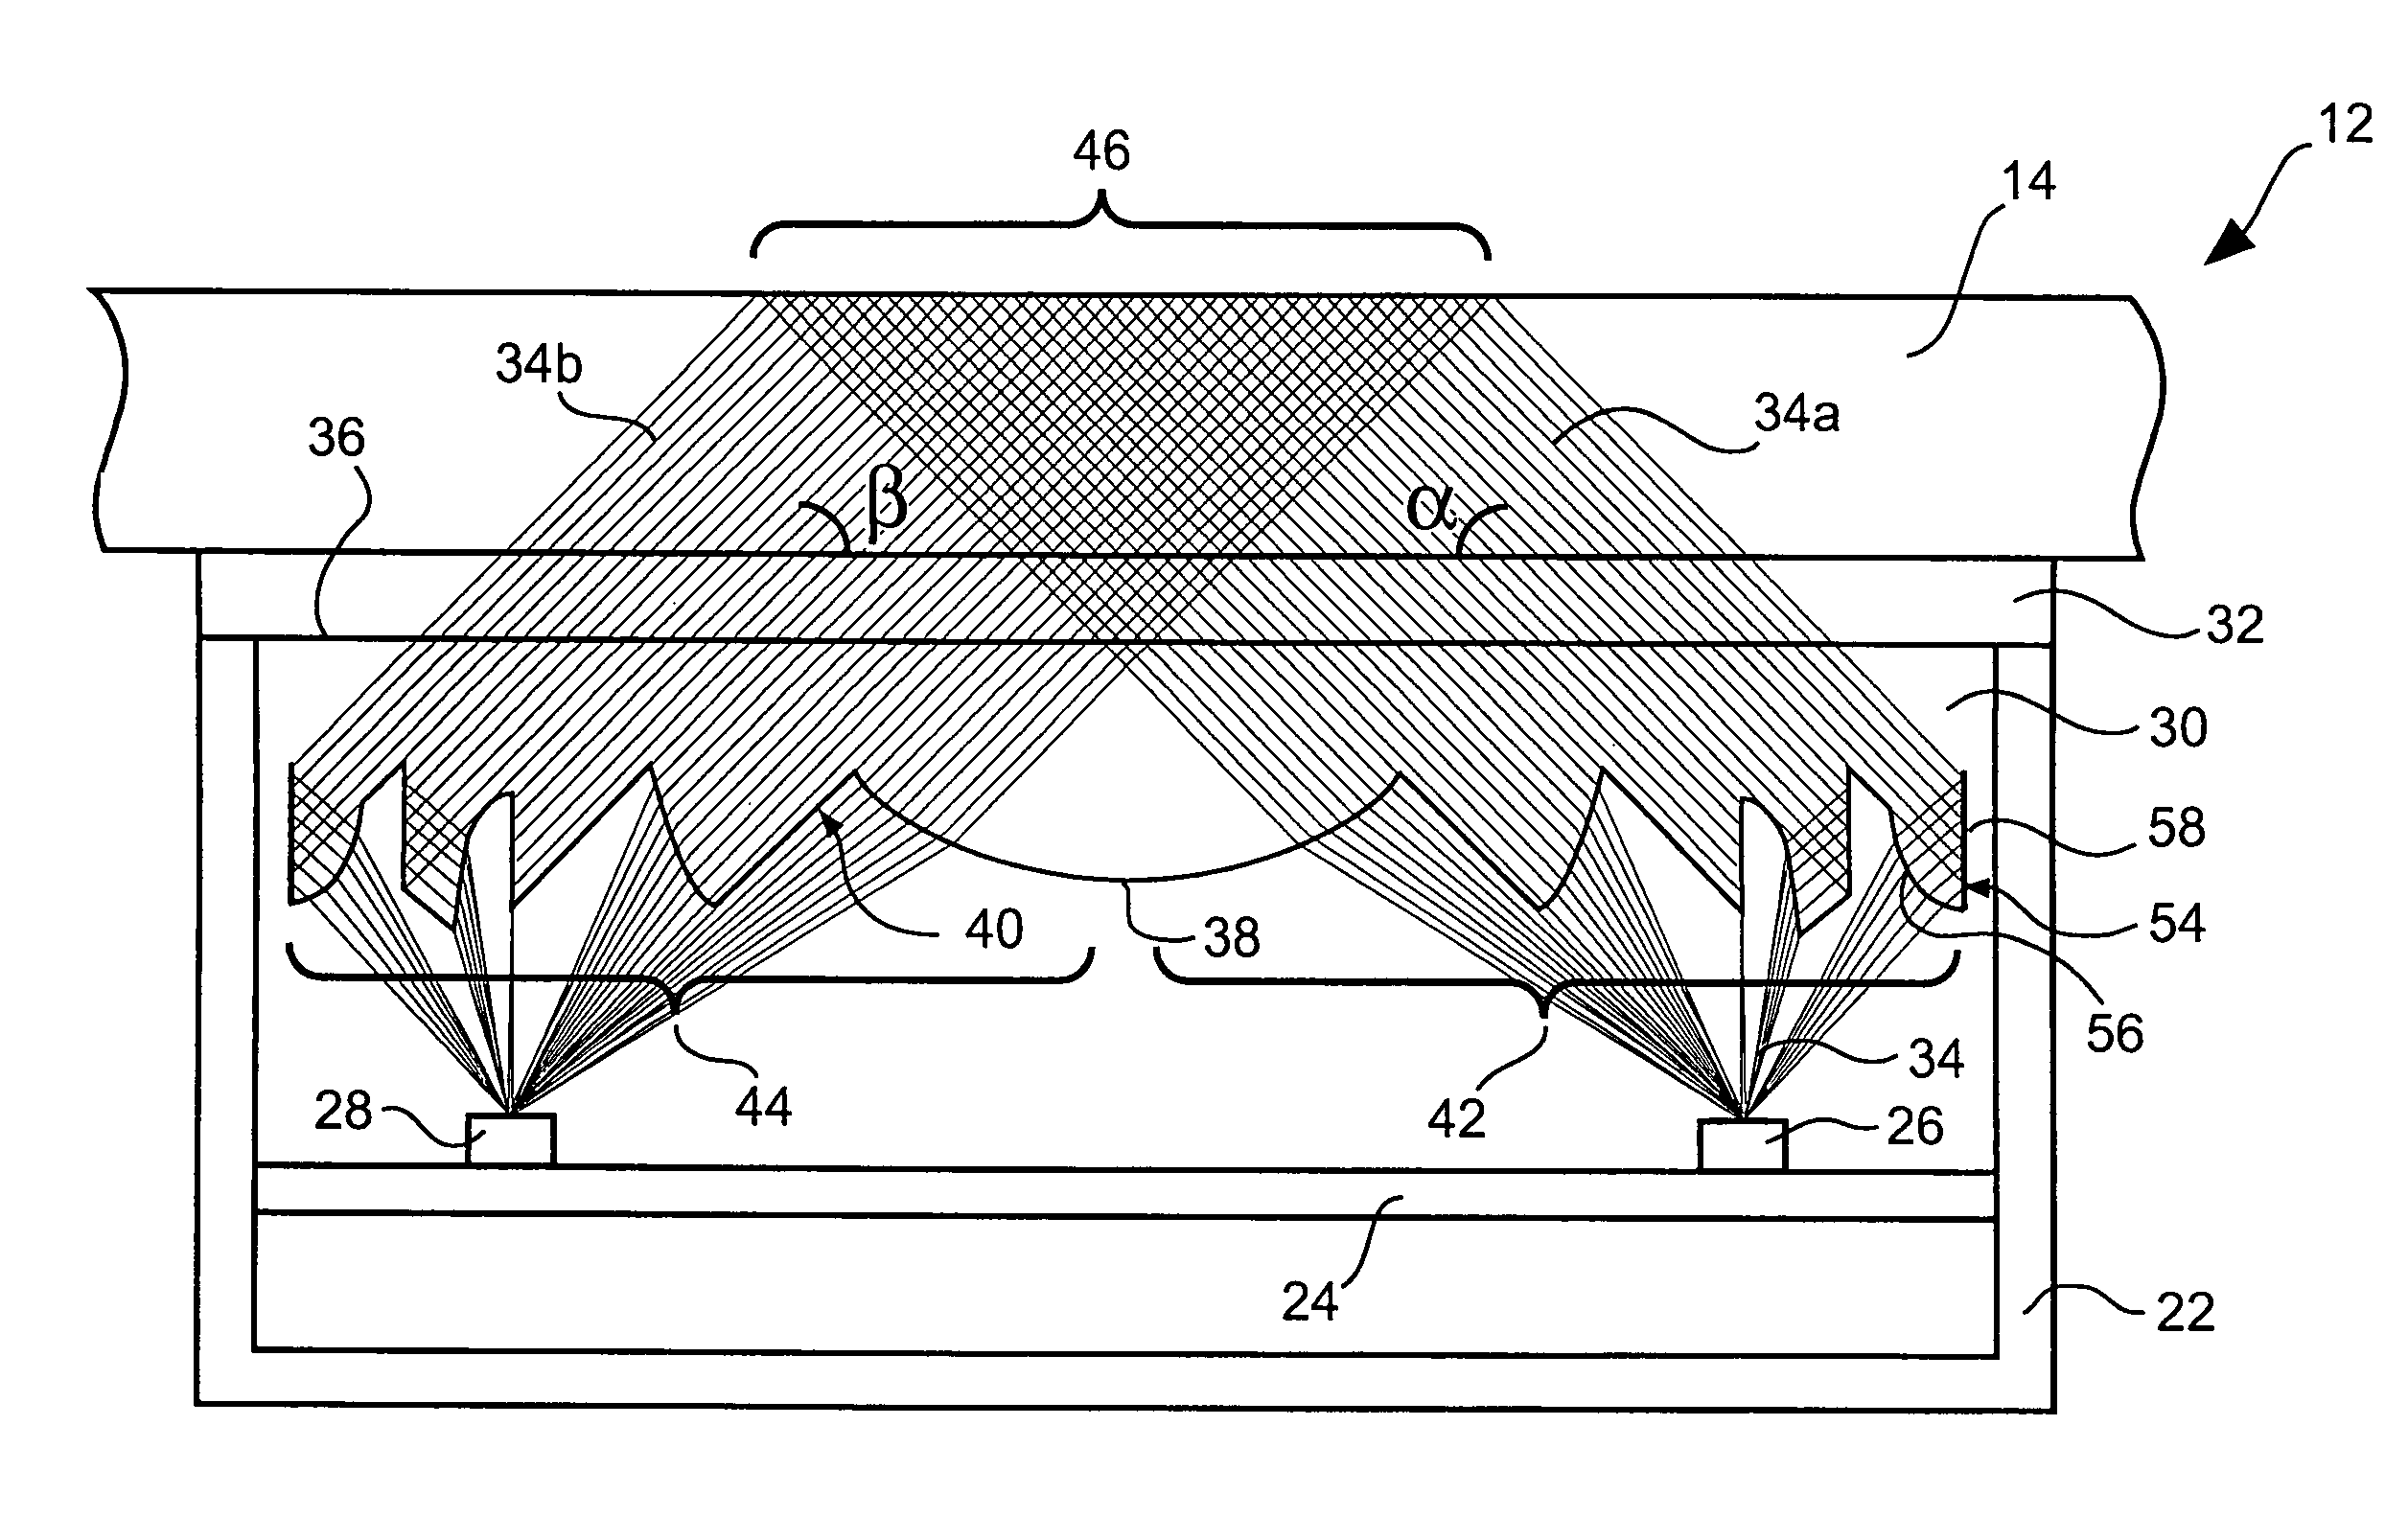 Optical sensor device for detecting wetting